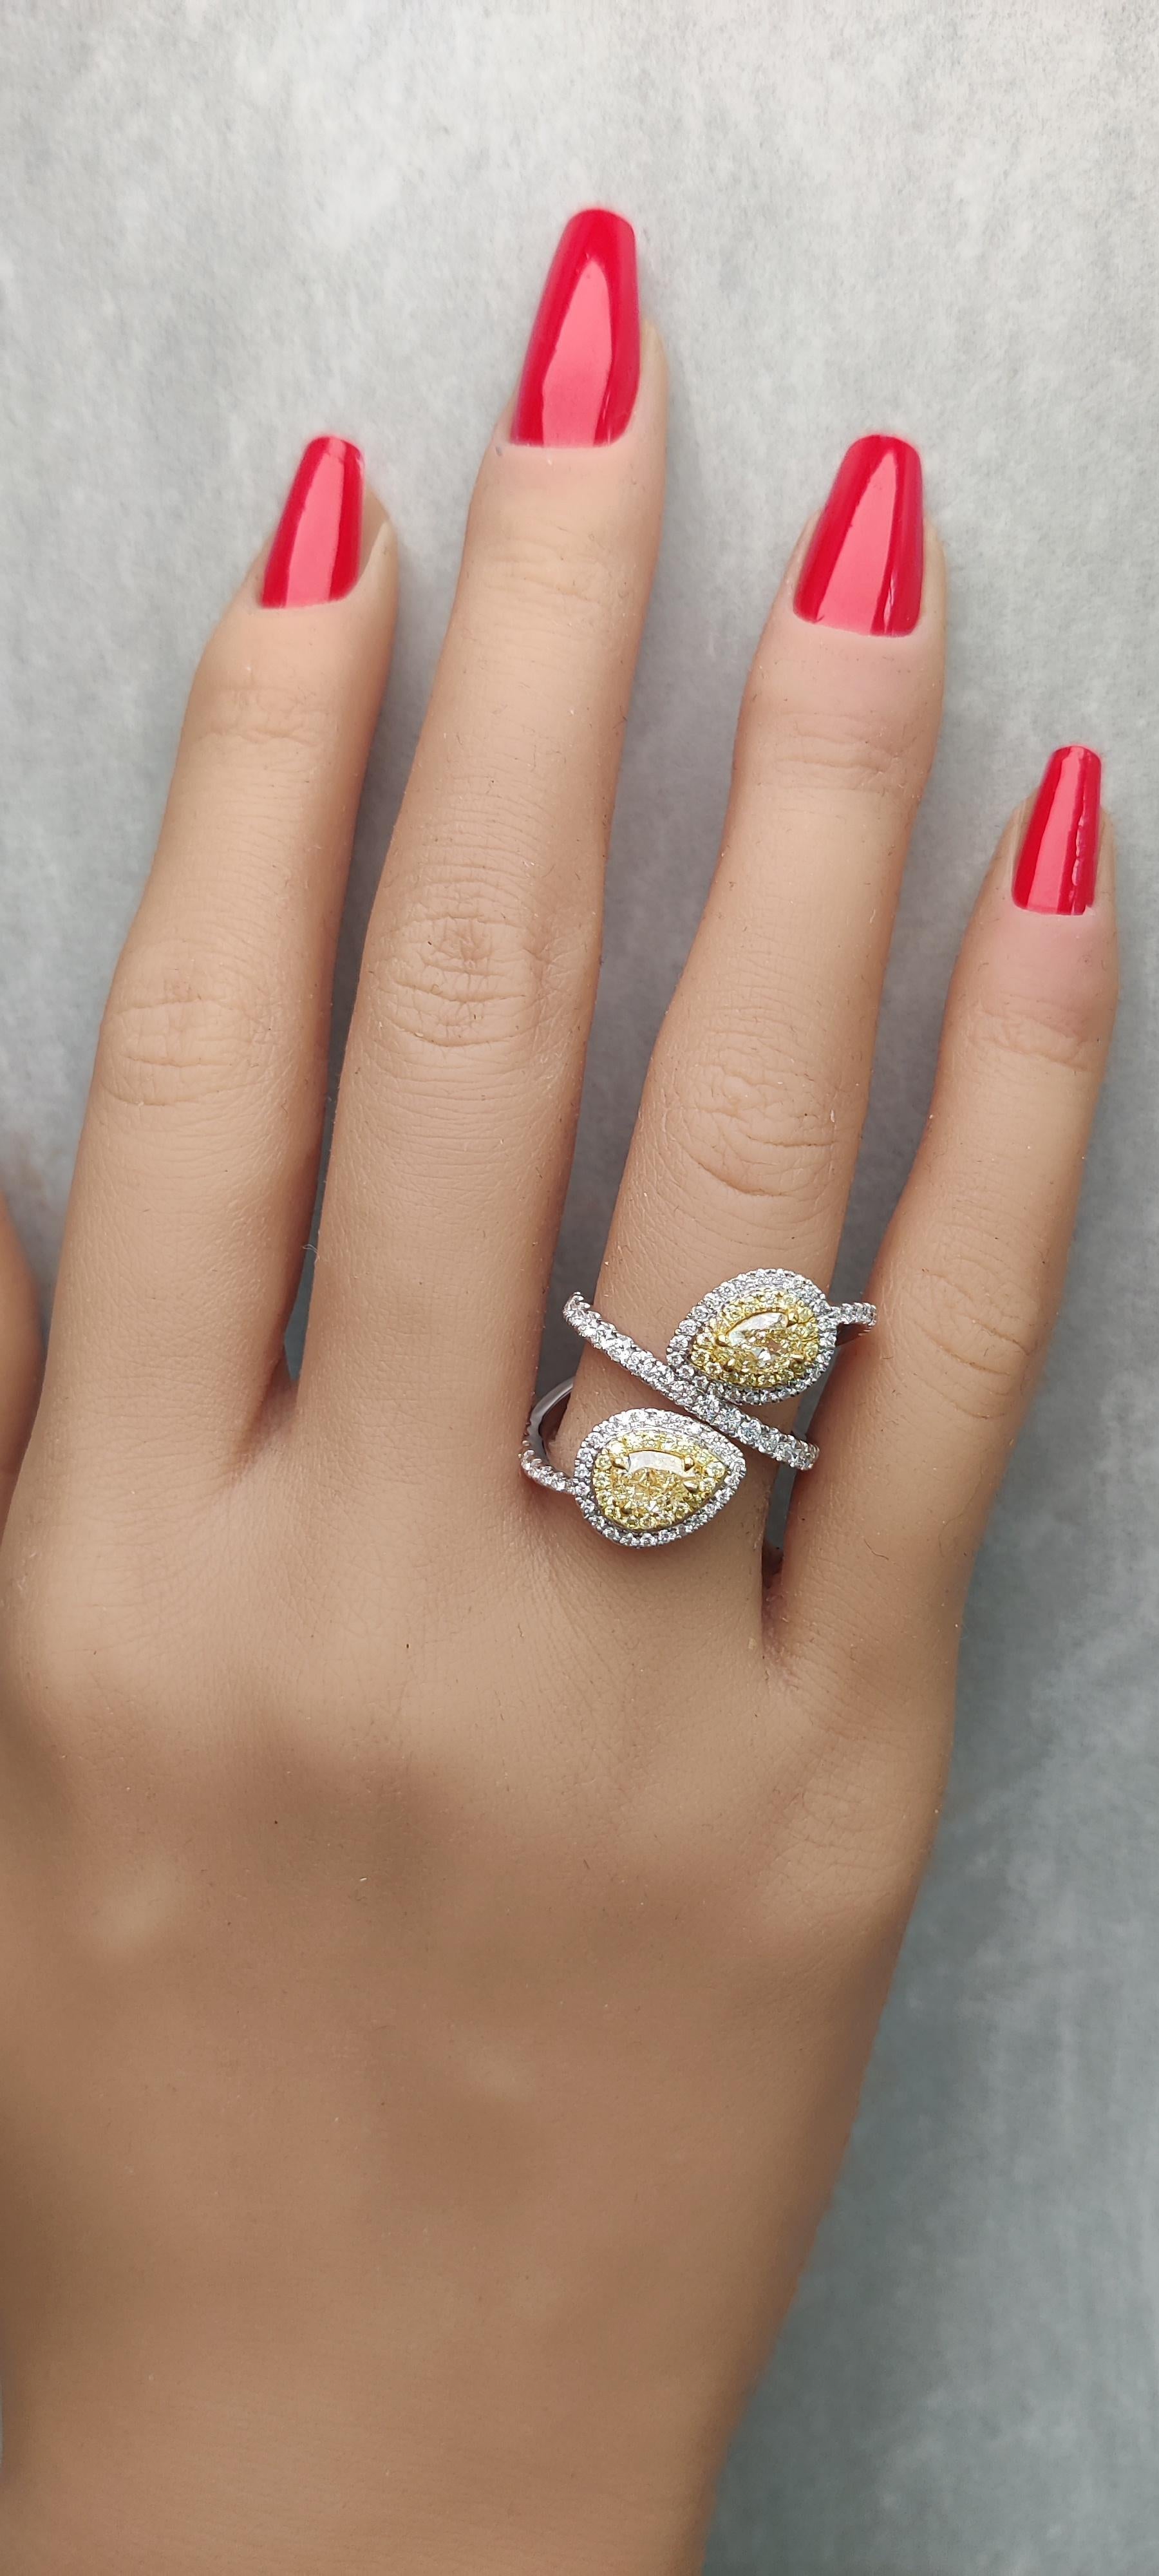 RareGemWorld's classic GIA certified diamond ring. Mounted in a beautiful 18K Yellow and White setting with two natural pear cut yellow diamonds. The yellow diamonds are surrounded by round natural white diamond melee and round natural yellow